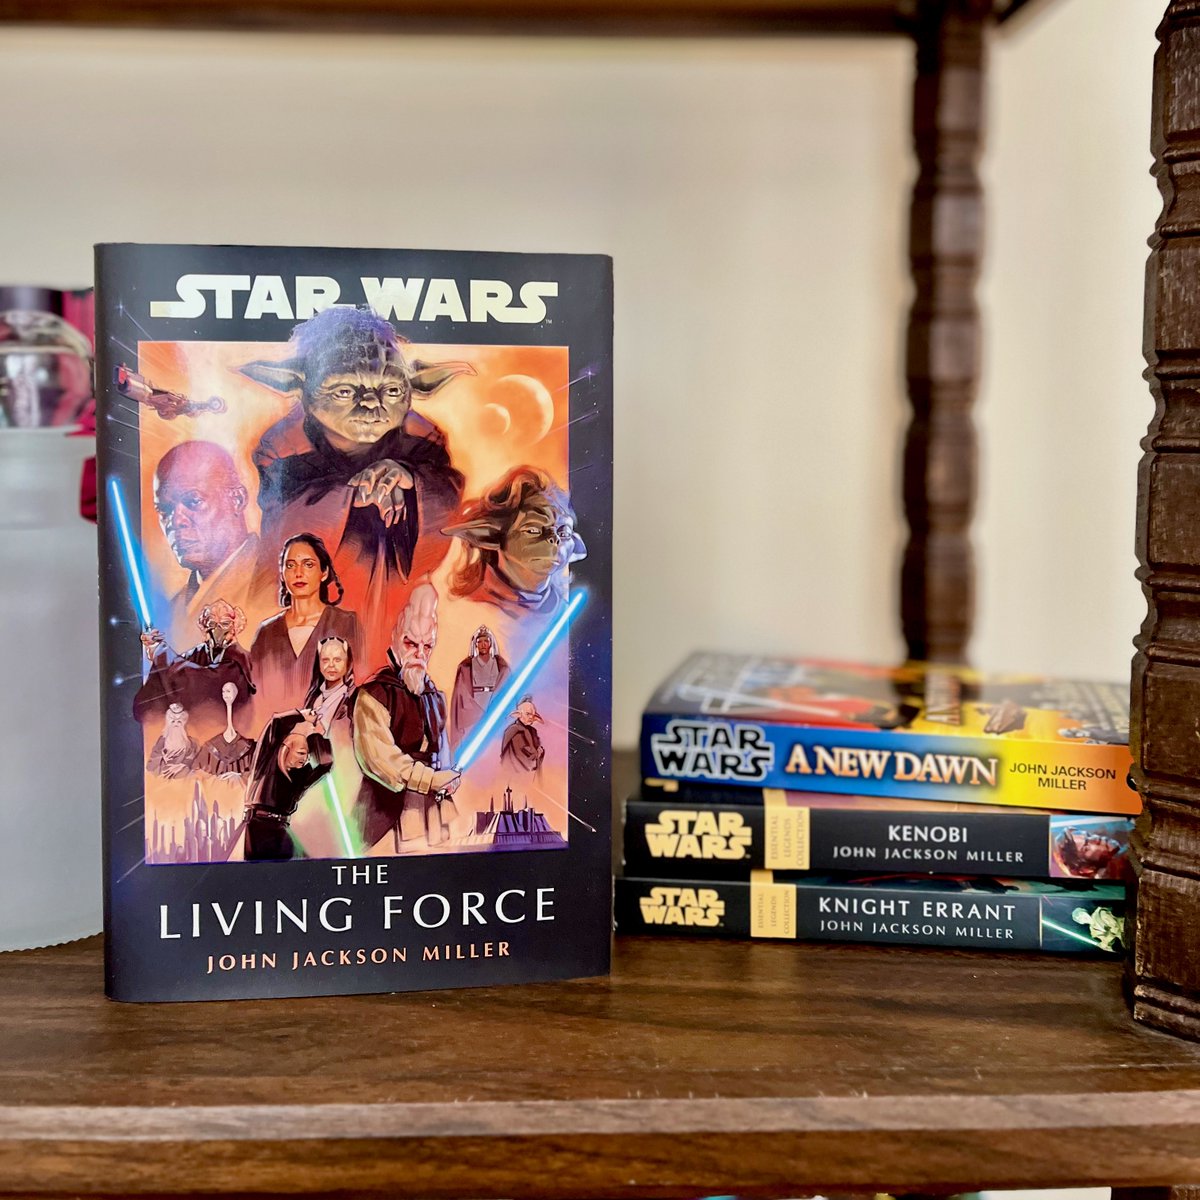 Feels good adding a new @jjmfaraway book to our shelves! Have you picked up THE LIVING FORCE yet?